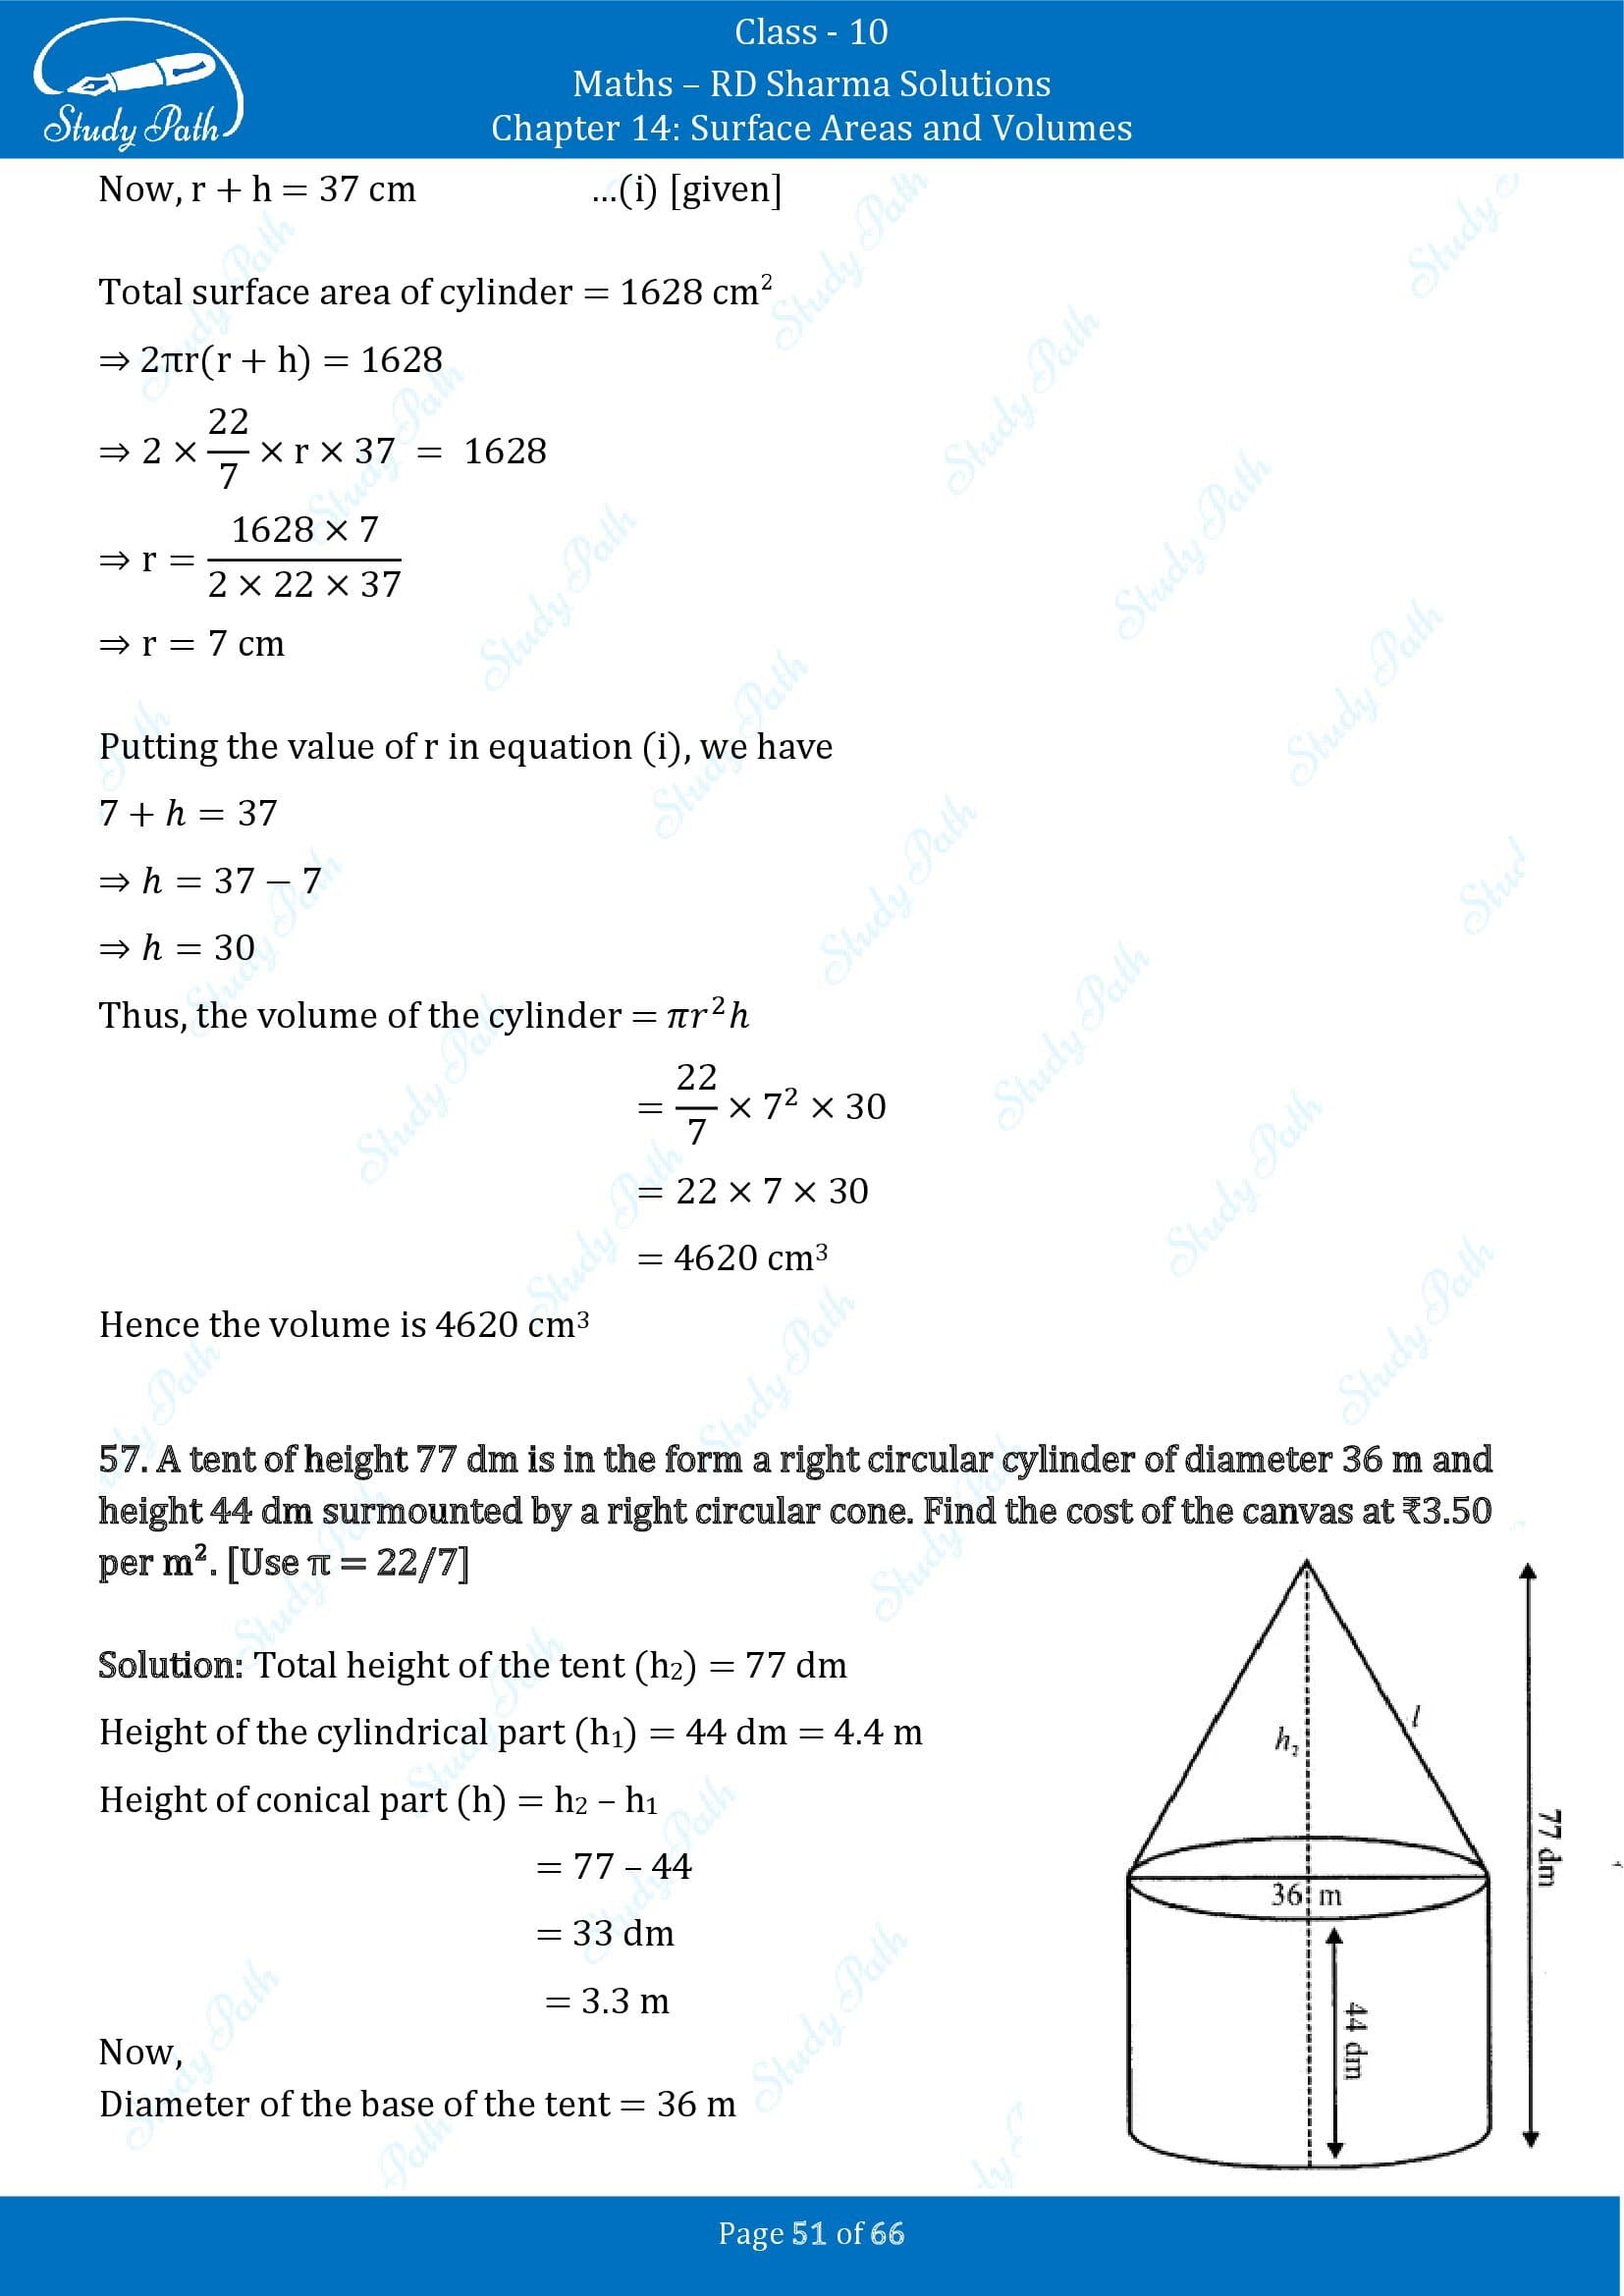 RD Sharma Solutions Class 10 Chapter 14 Surface Areas and Volumes Exercise 14.1 00051